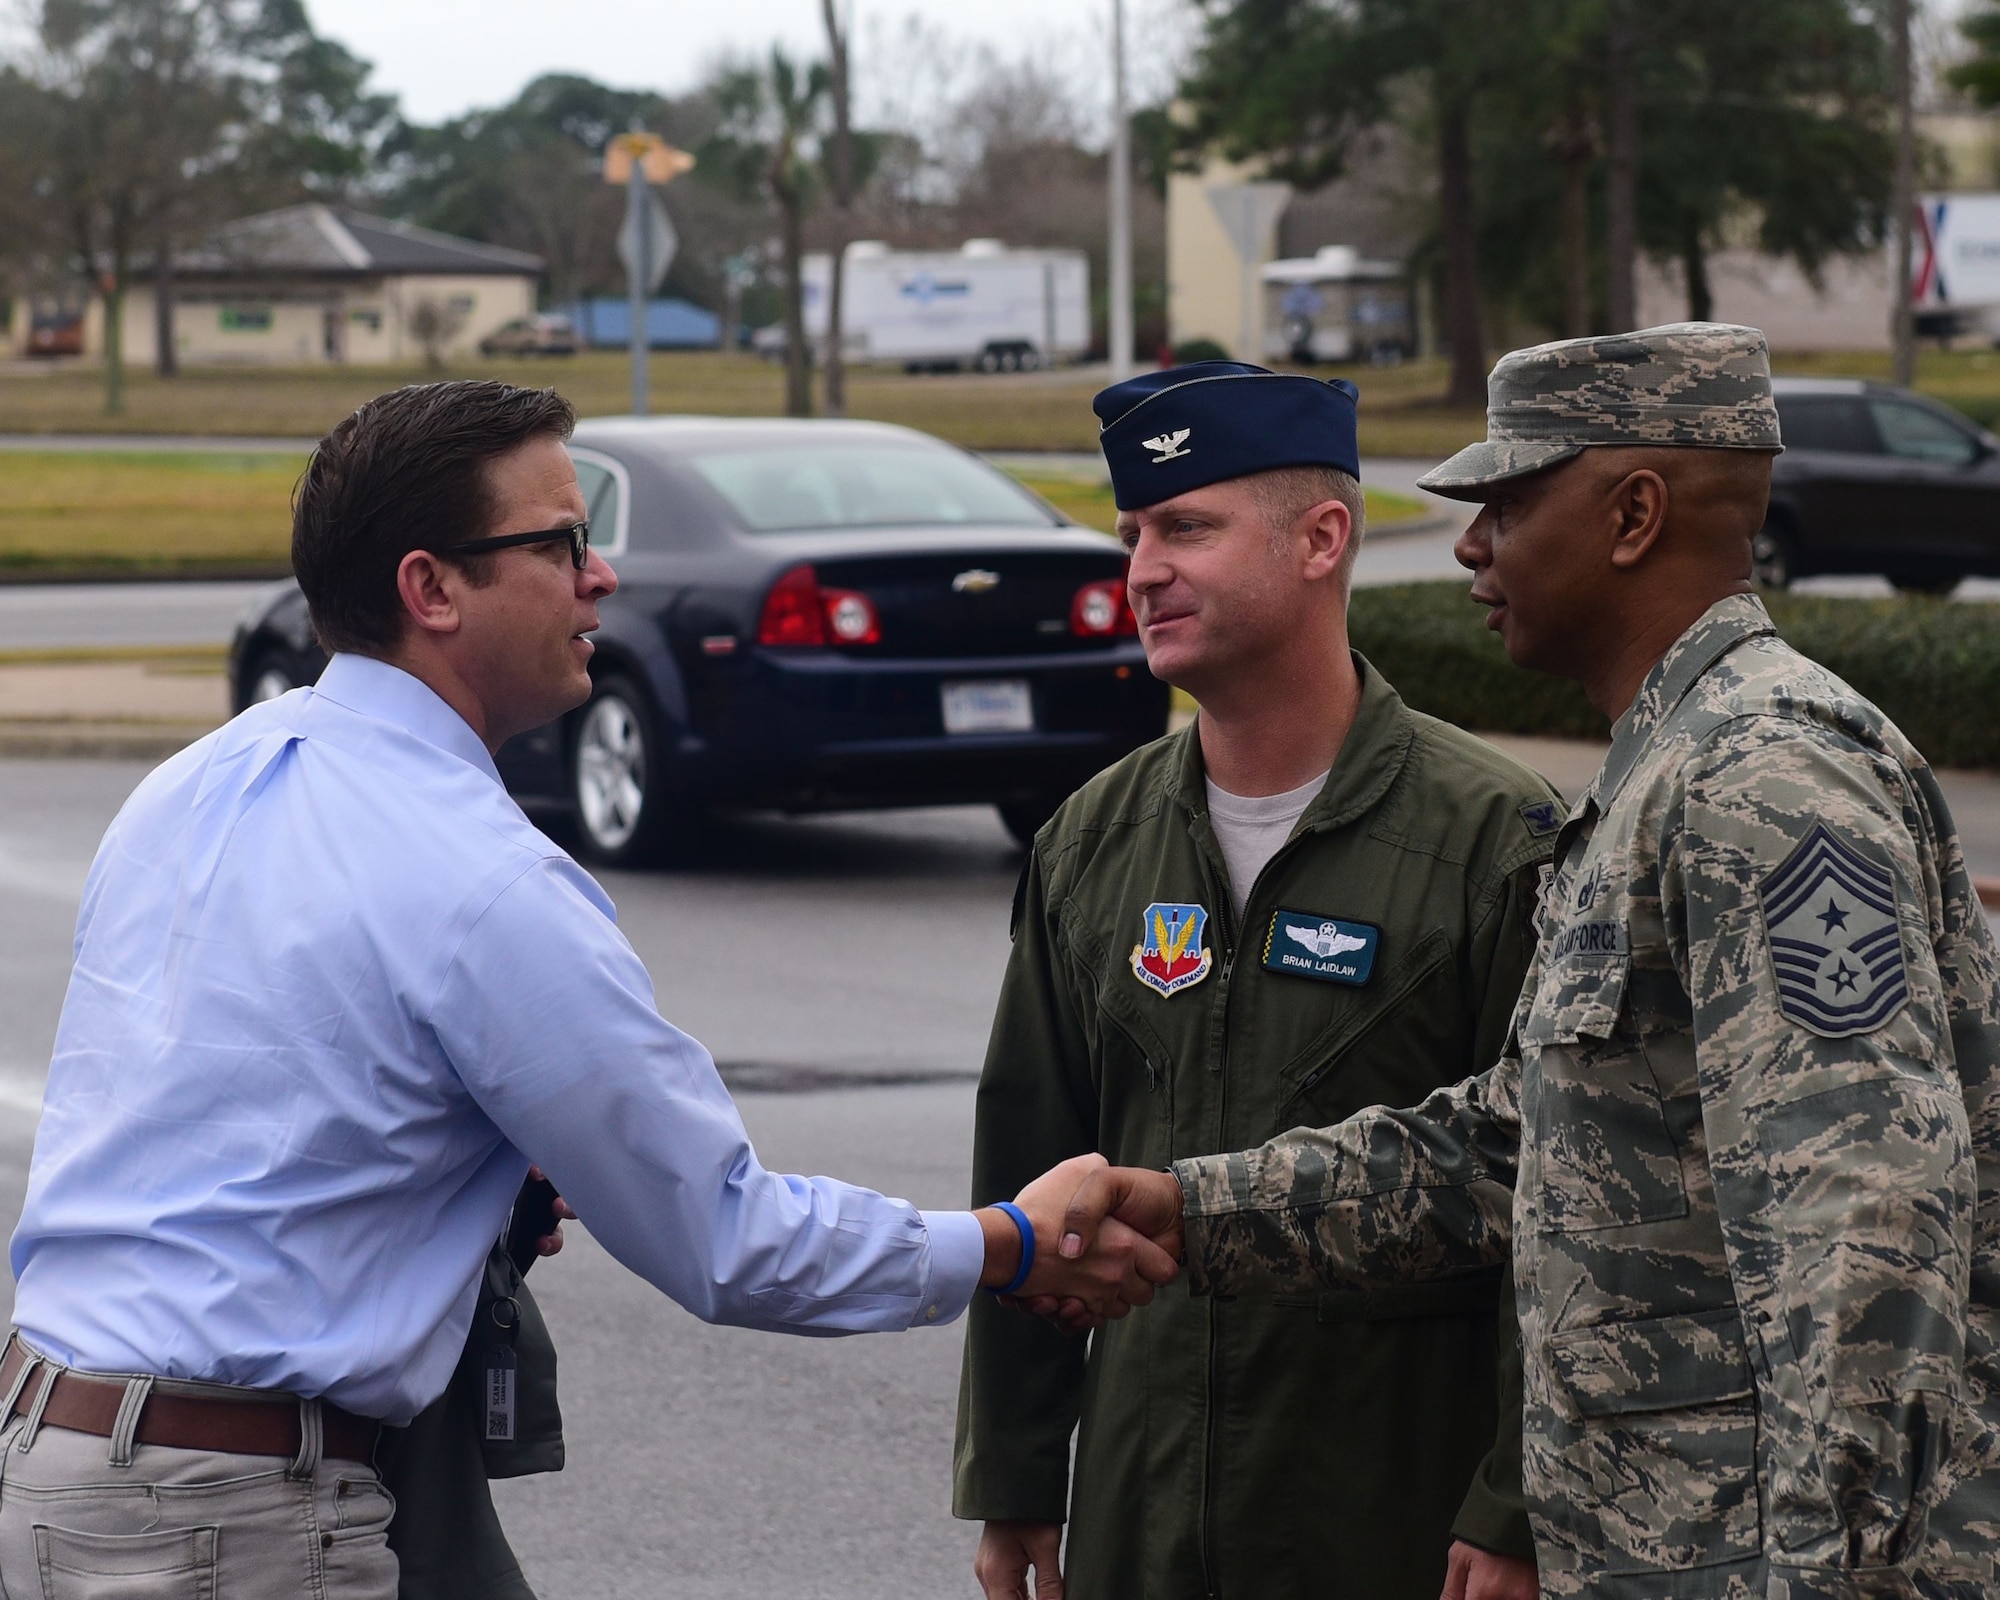 Florida Lt. Gov. Carlos Lopez-Cantera meets Col. Brian Laidlaw, 325th Fighter Wing vice commander, and CMSgt Craig Williams, 325th FW command chief, at Tyndall Air Force Base, Fla., Jan. 10, 2018. Lopez-Cantera visited Tyndall to learn about the 325th Fighter Wing mission and to be briefed on the critical skills and assets the 325th FW can bring to the air dominance theater. (U.S. Air Force photo by Senior Airman Cody R. Miller/Released)